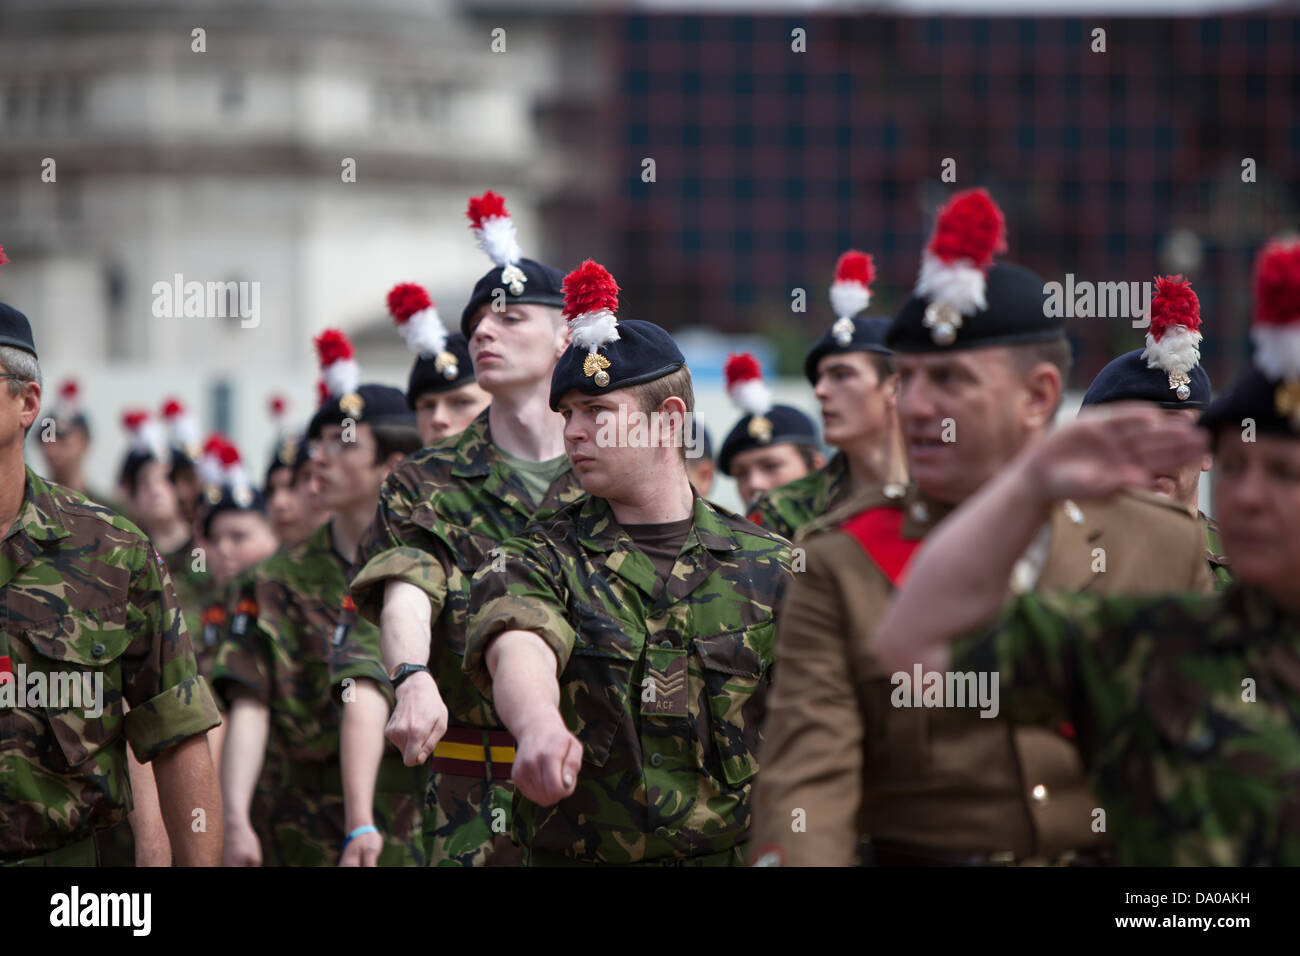 Birmingham, UK. 29th June, 2013. Soldiers on parade in Centenary Square ...